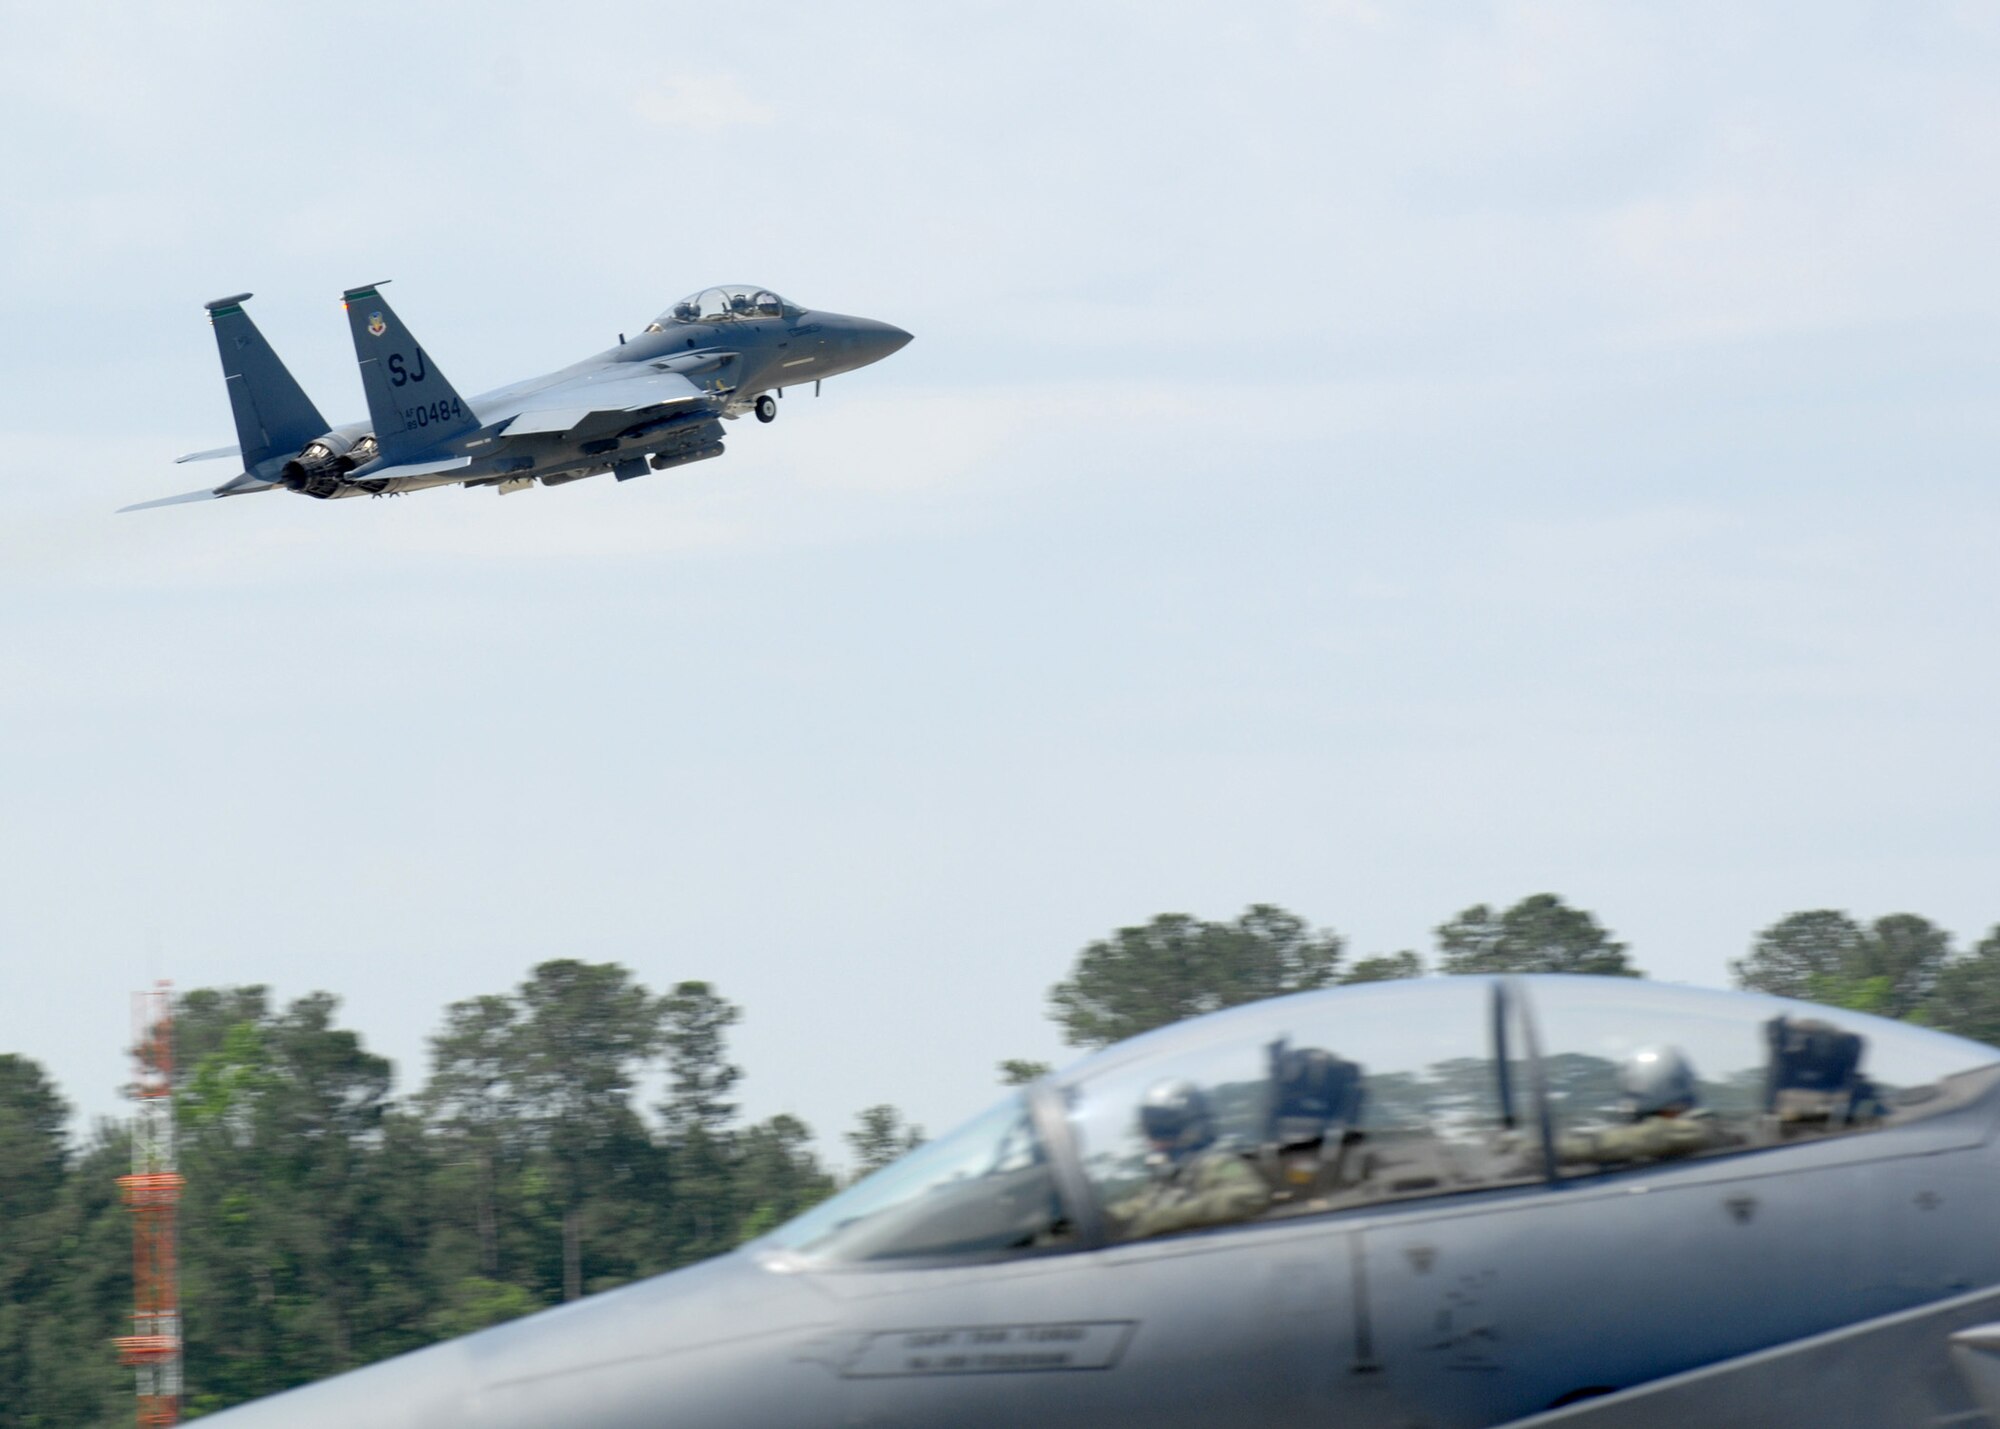 An F-15E Strike Eagle from the 335th Fighter Squadron, takes off, Seymour Johnson AFB, May 21, 2008. The F-15E Strike Eagle is the Air Force's dual role fighter and is the 4th Fighter Wings premier aircraft. (U.S. Air Force photo by Airman 1st Class Rae A. Henline)